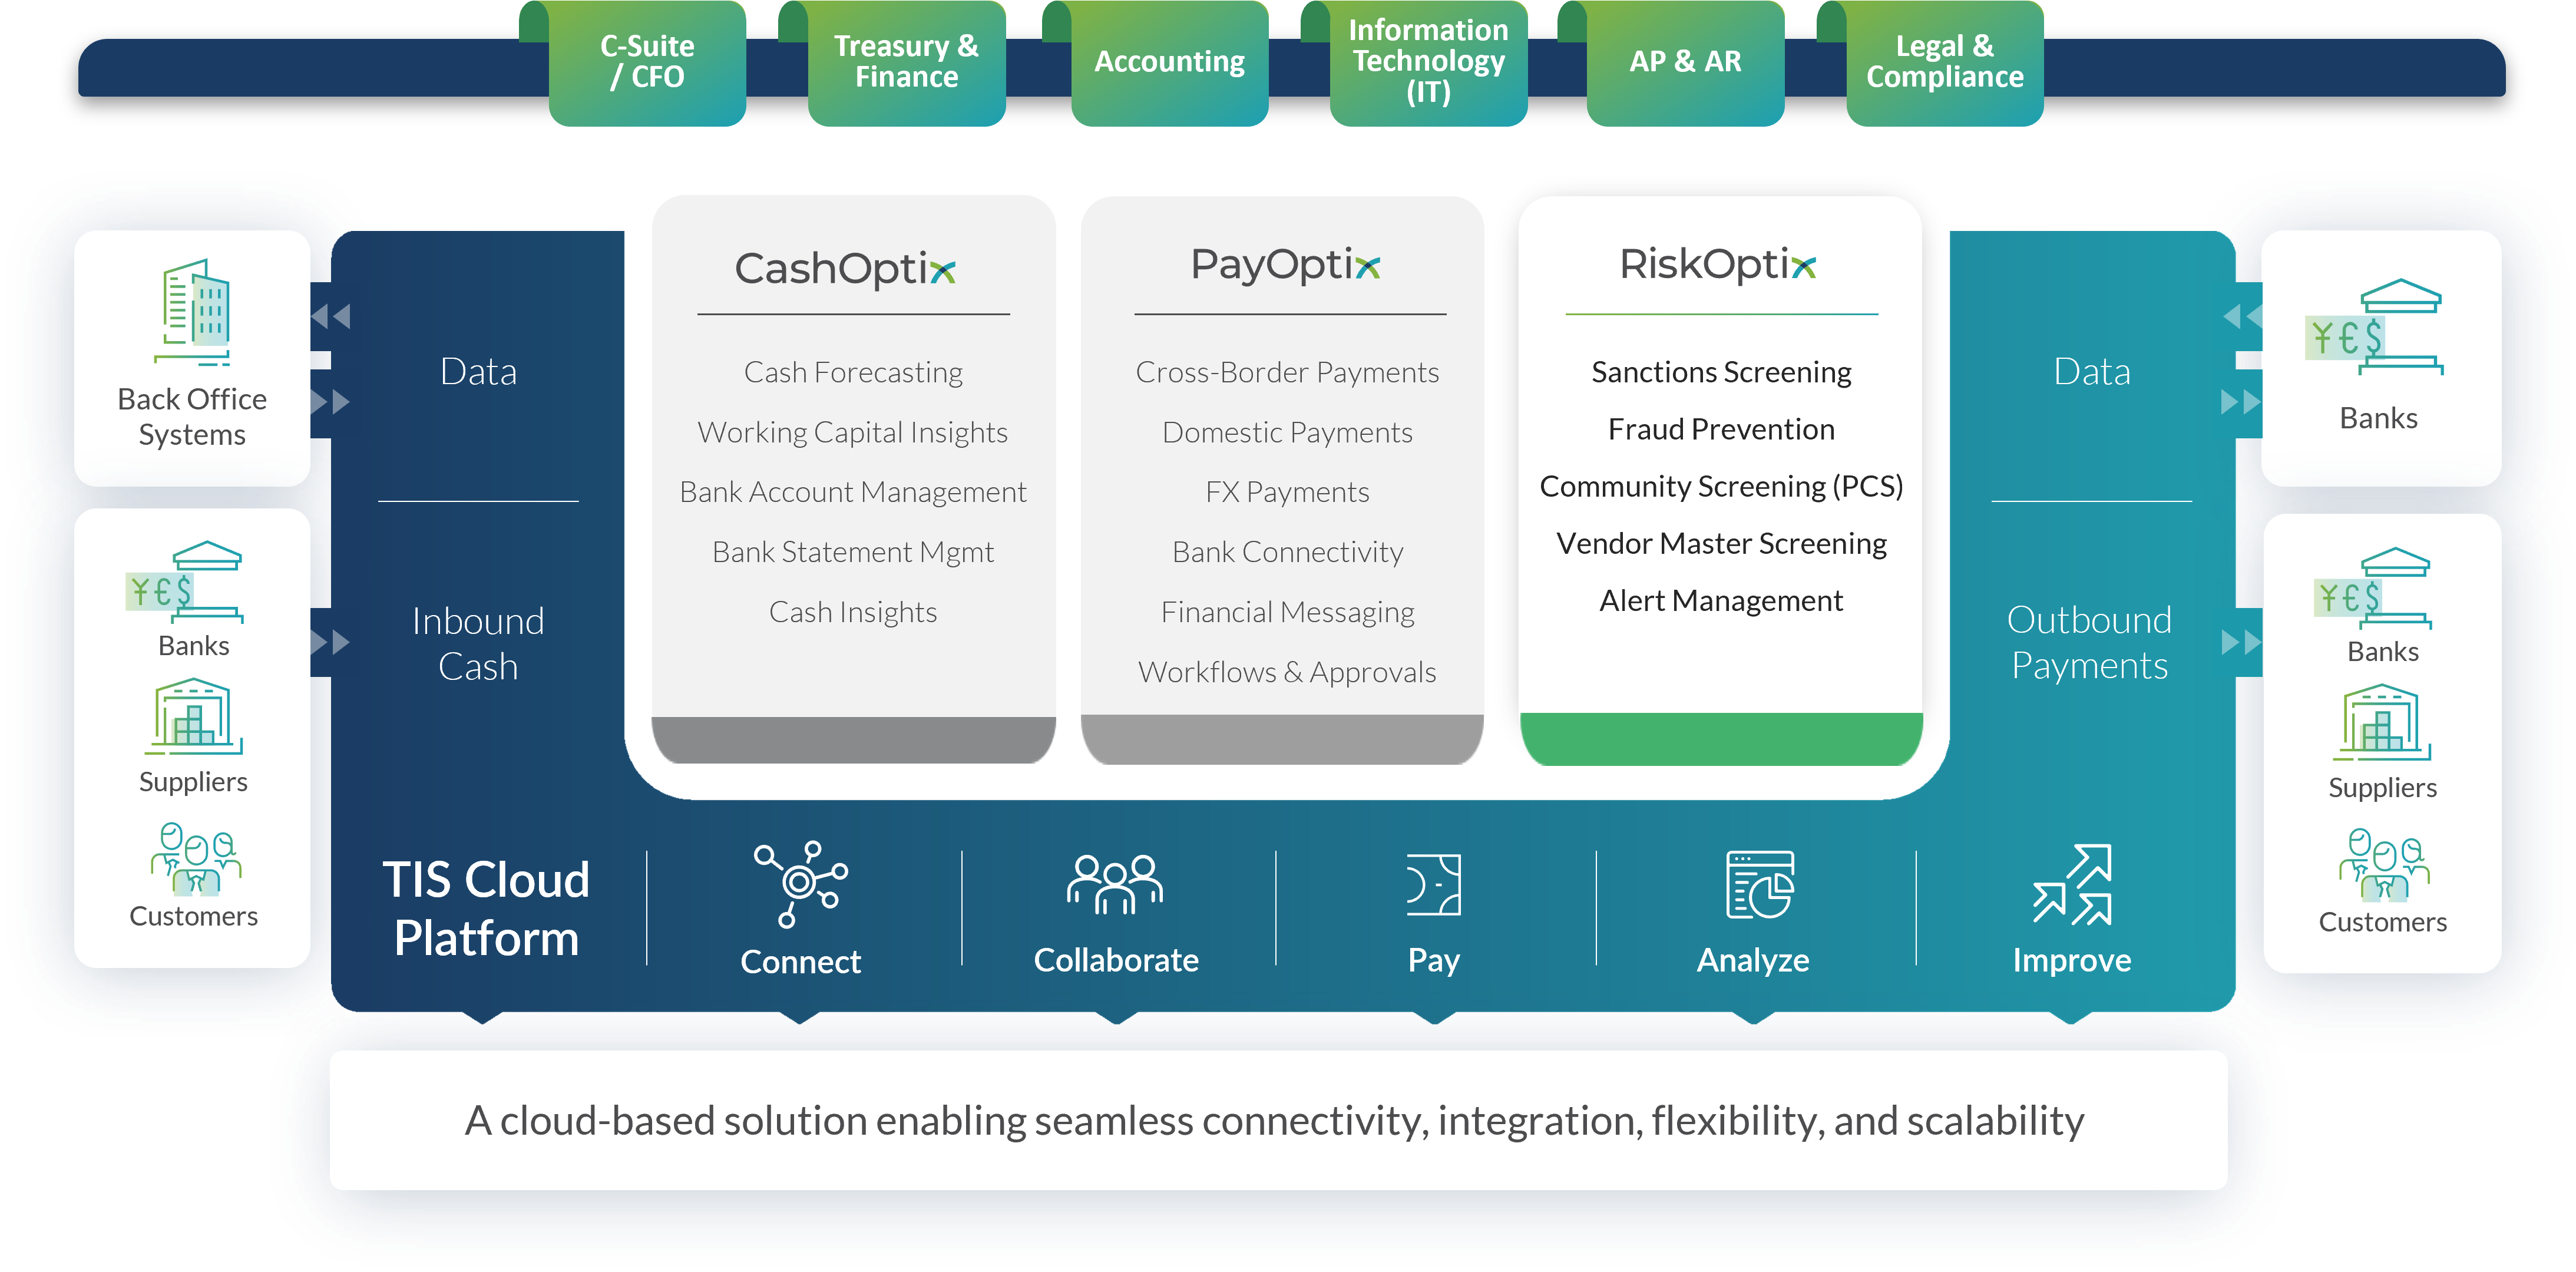 This image highlights the suite of compliance, sanctions screening, and fraud prevention tools that TIS provides to clients. 